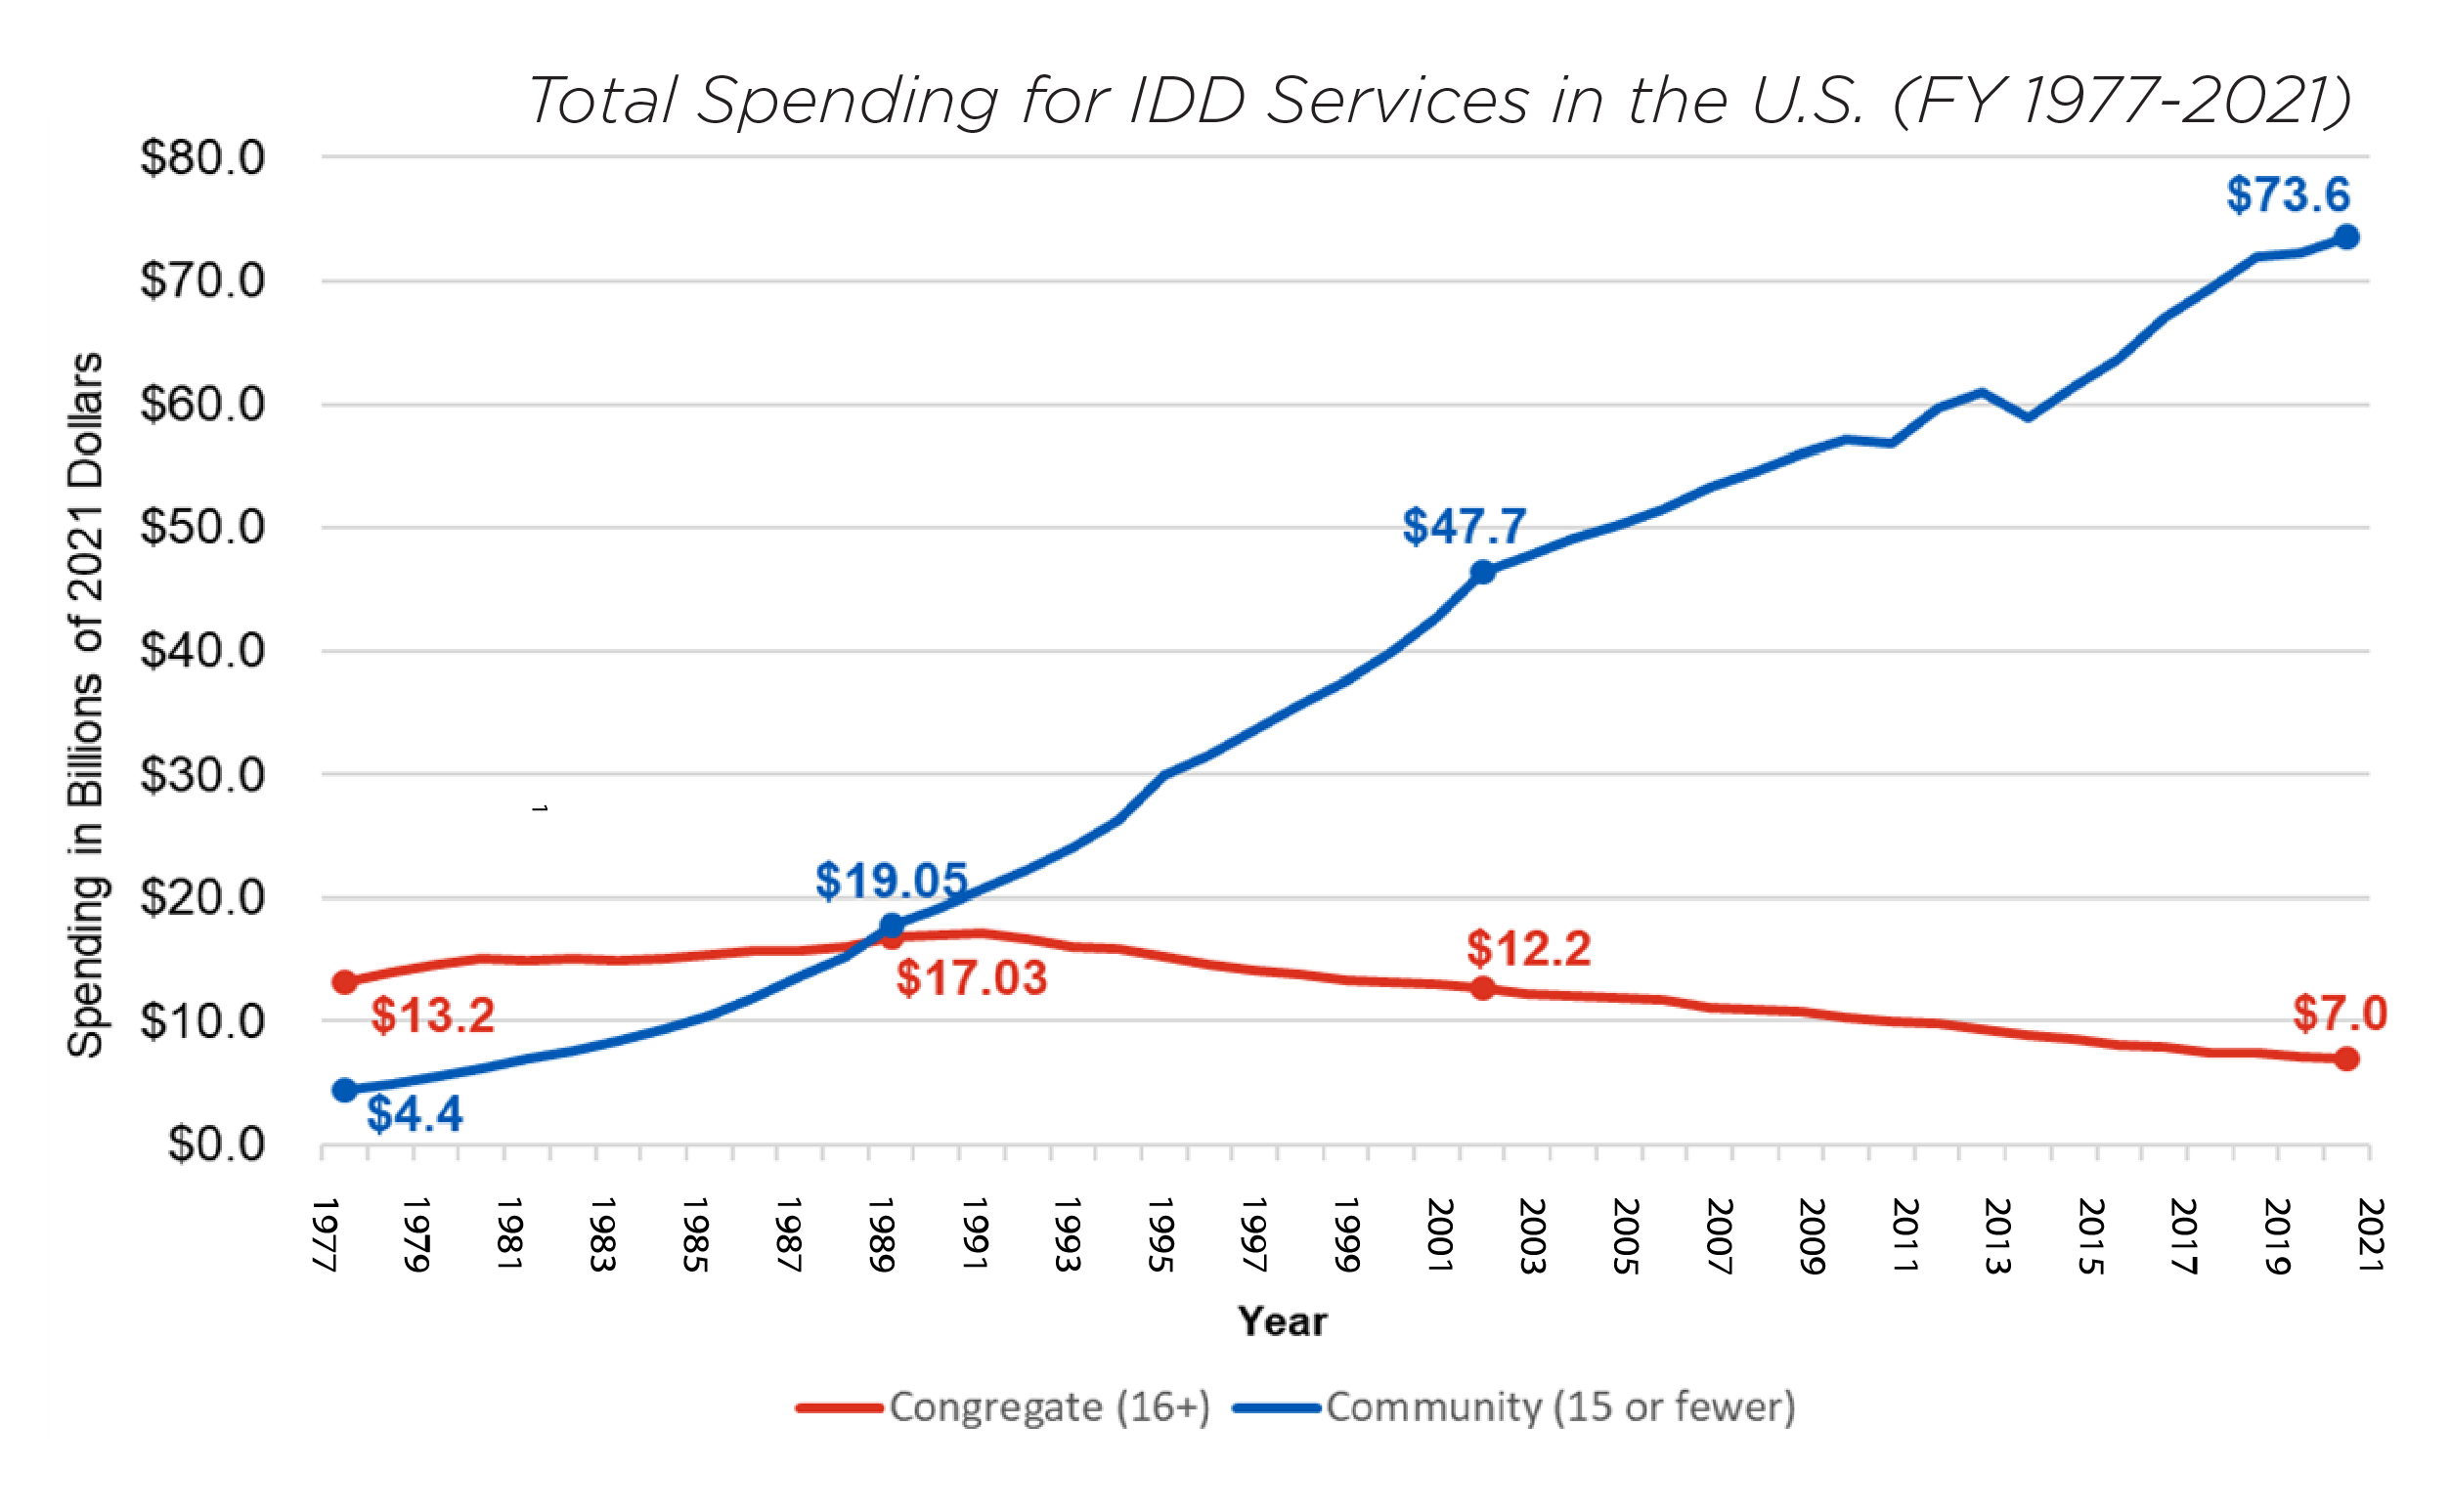 Total spending for IDD services in the U.S., FY 1977-2021